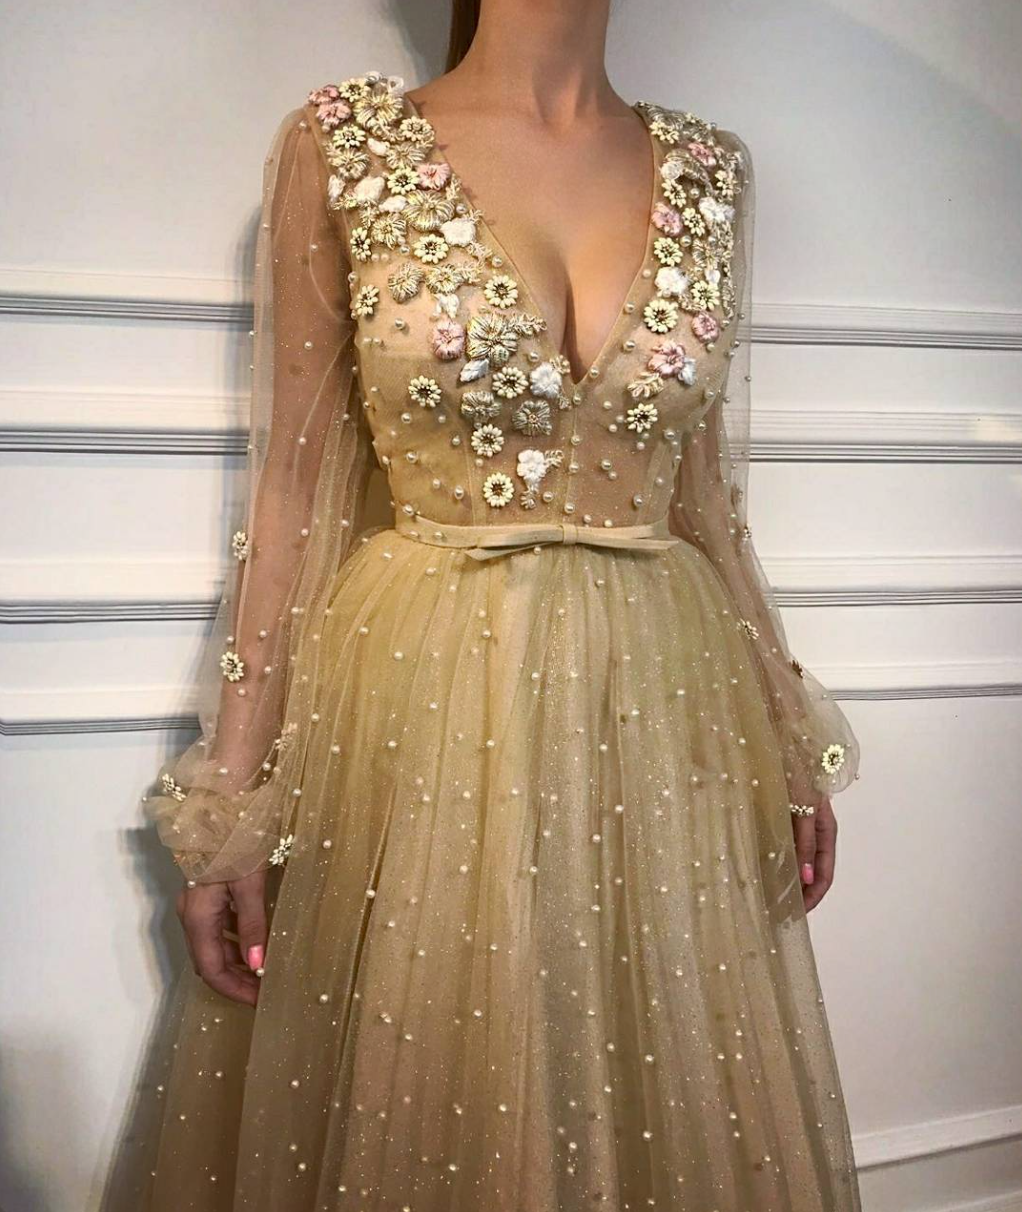 Gold A-Line dress with long sleeves, v-neck, beading and embroidery